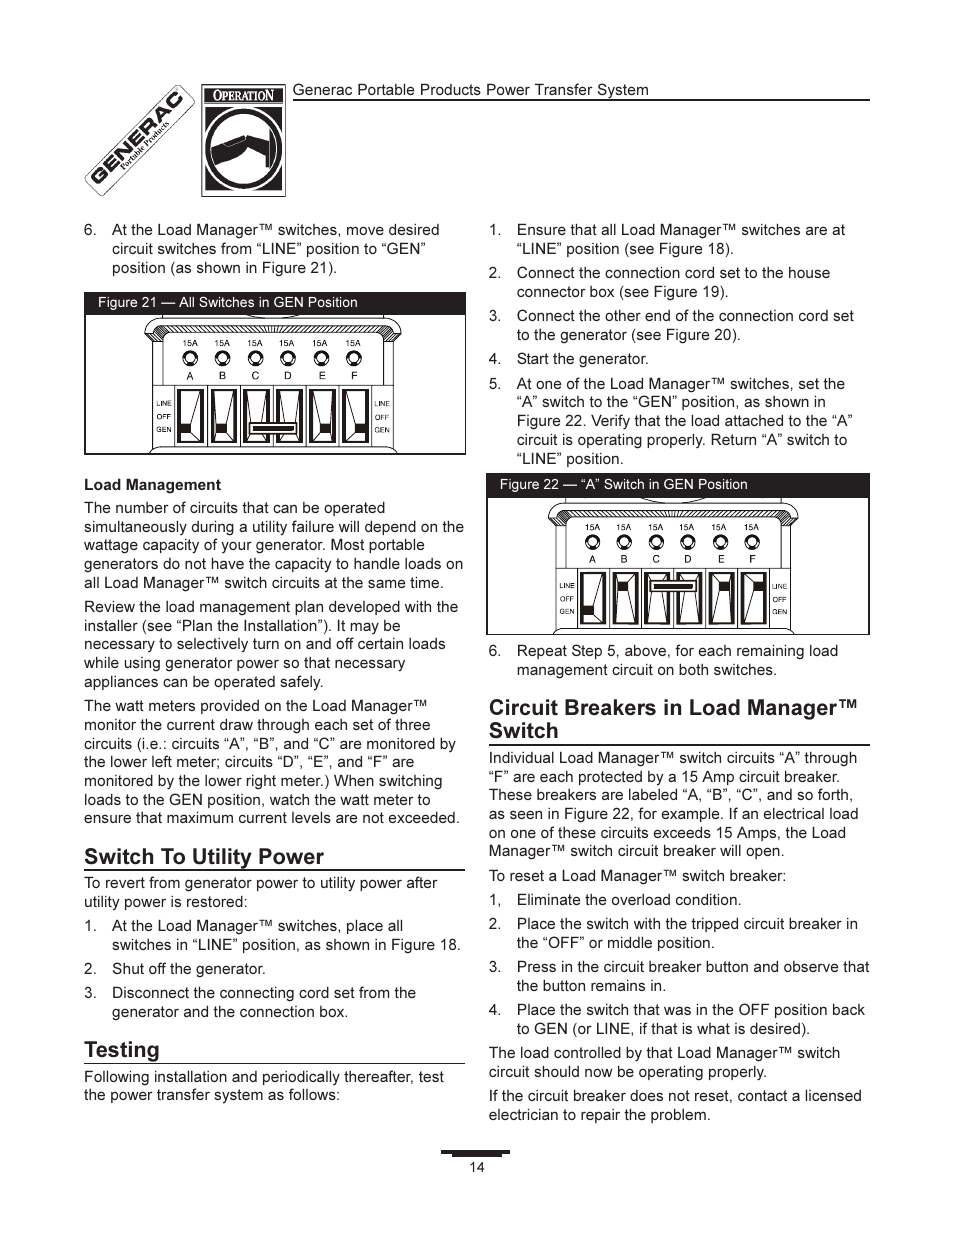 Switch to utility power, Testing, Circuit breakers in load manager switch | Generac 1403-0 User Manual | Page 14 / 16